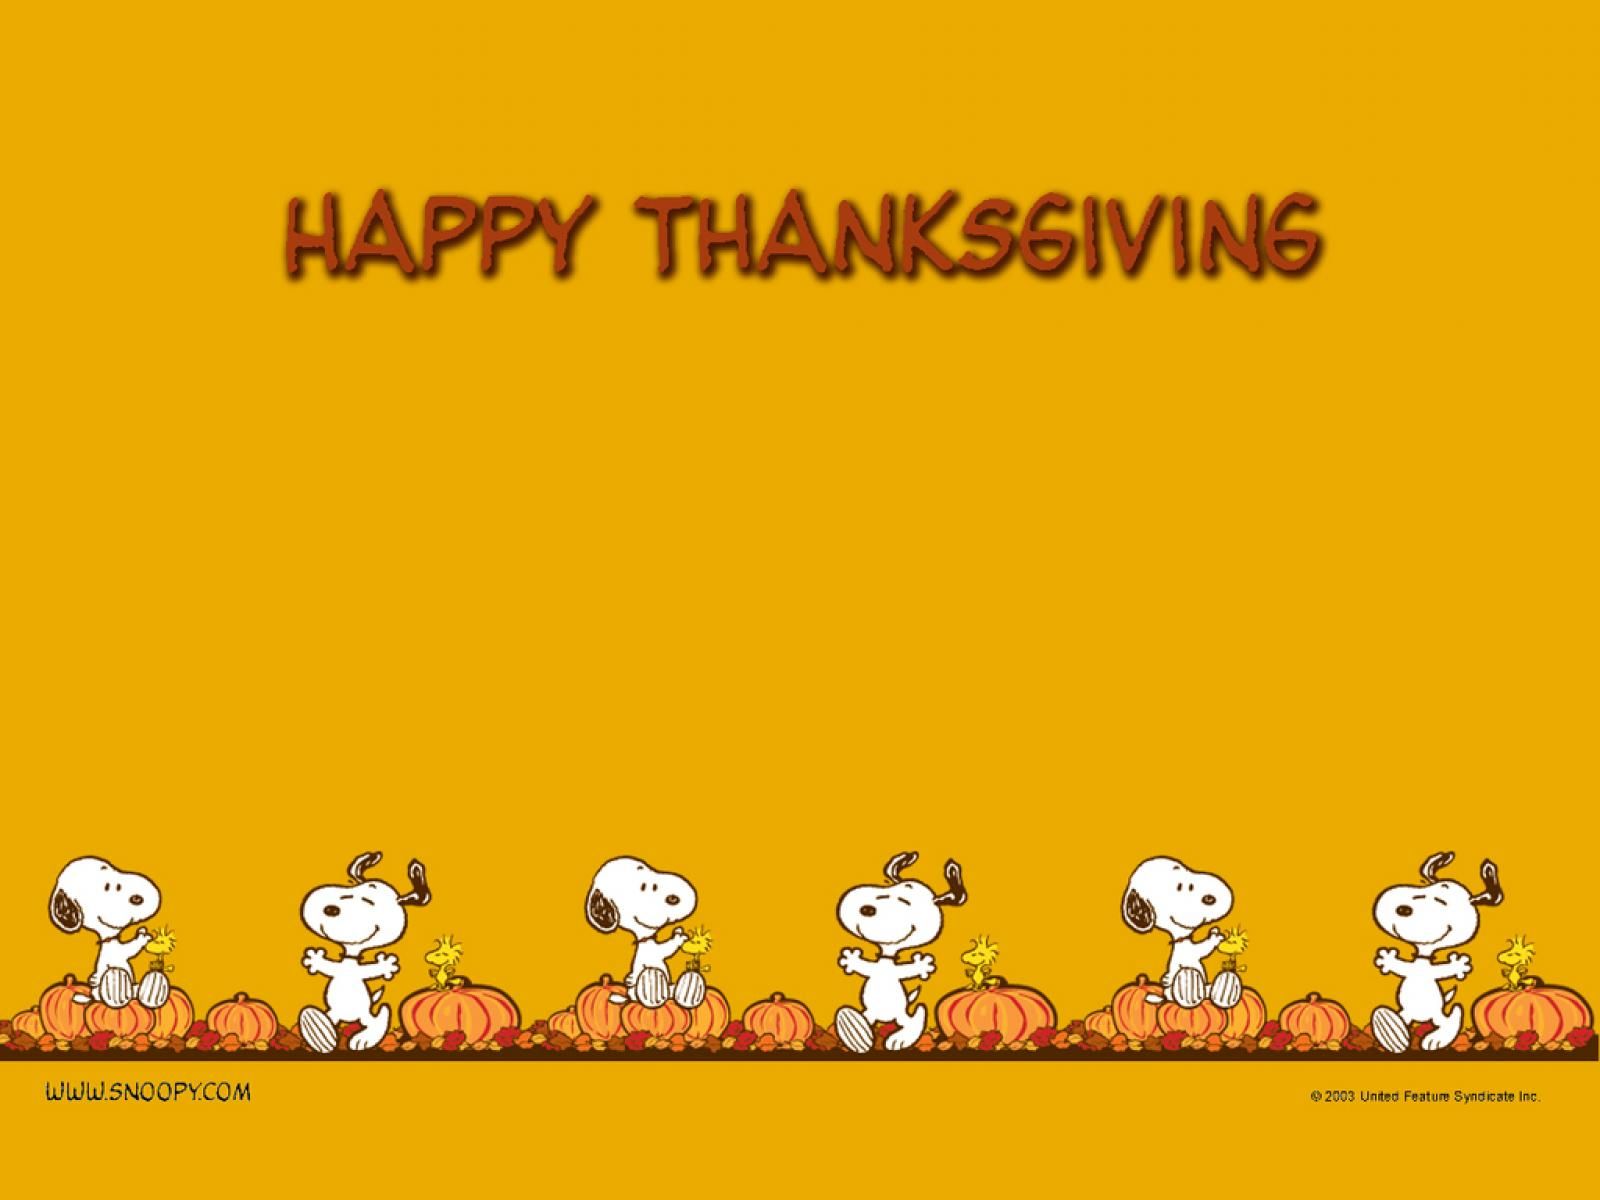 Thanksgiving Day Charlie Brown) Wallpapers HD Backgrounds Image